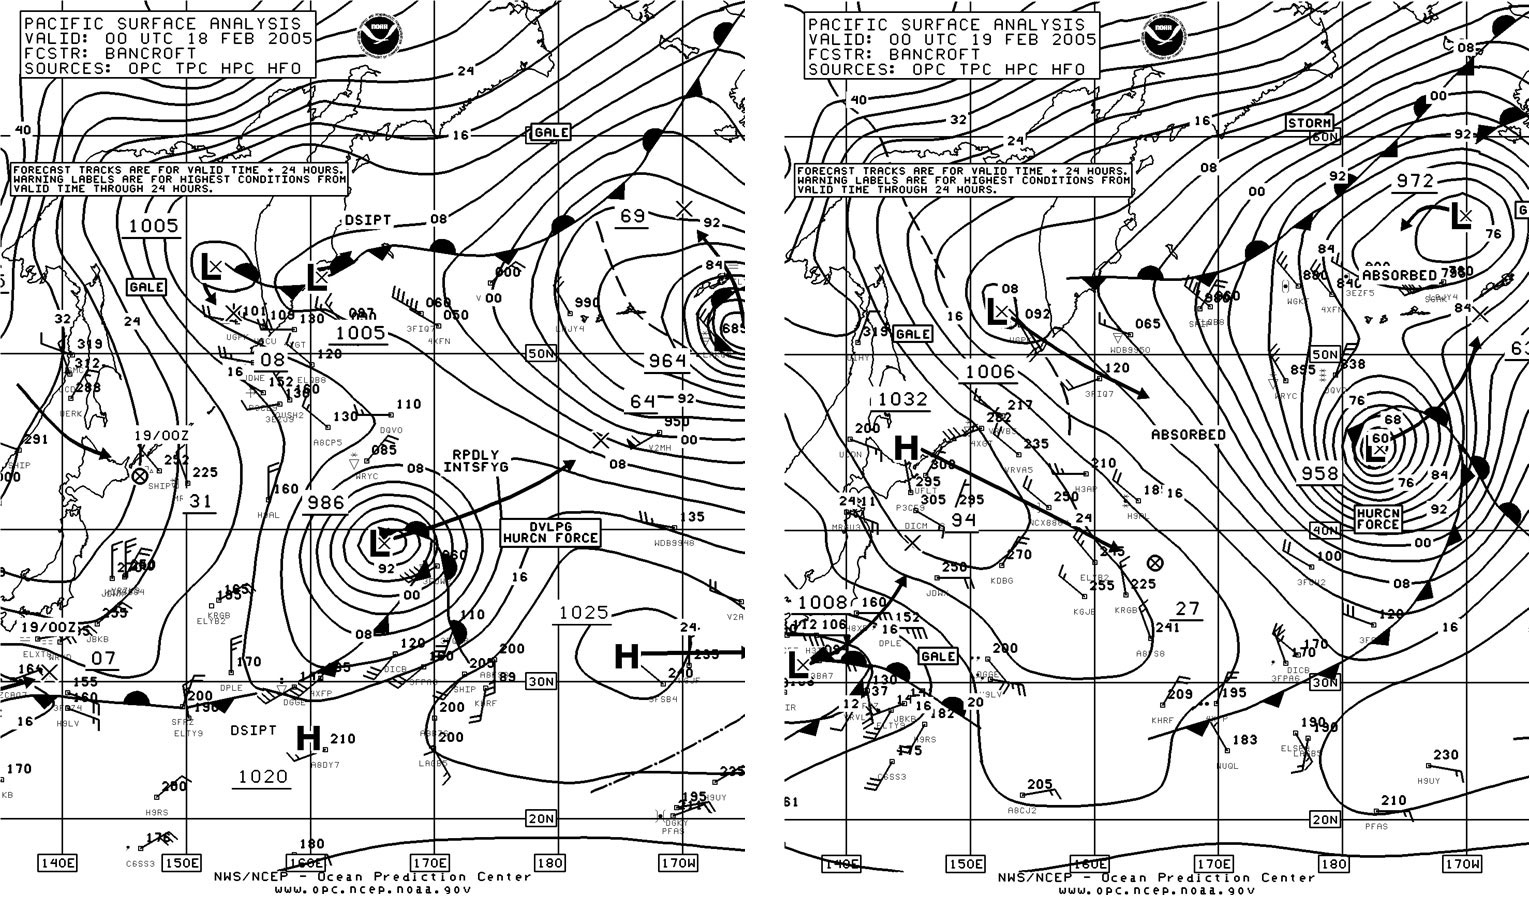 Figure 11. OPC North Pacific Surface 
Analysis Chart - Click to Enlarge